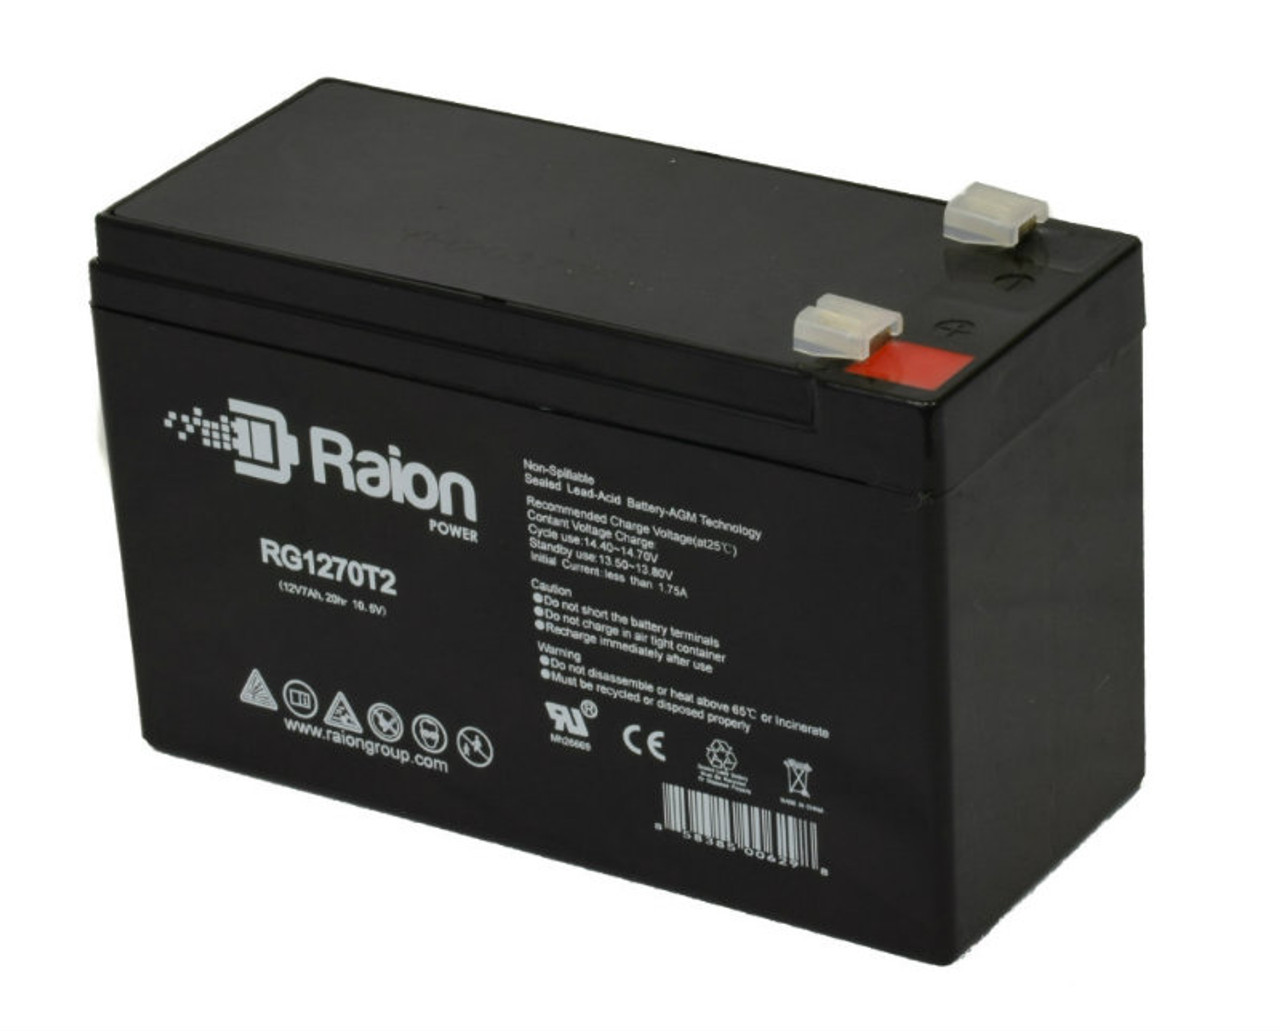 Raion Power RG1270T1 12V 7Ah Non-Spillable Replacement Battery for Sunnyway SW1265 1